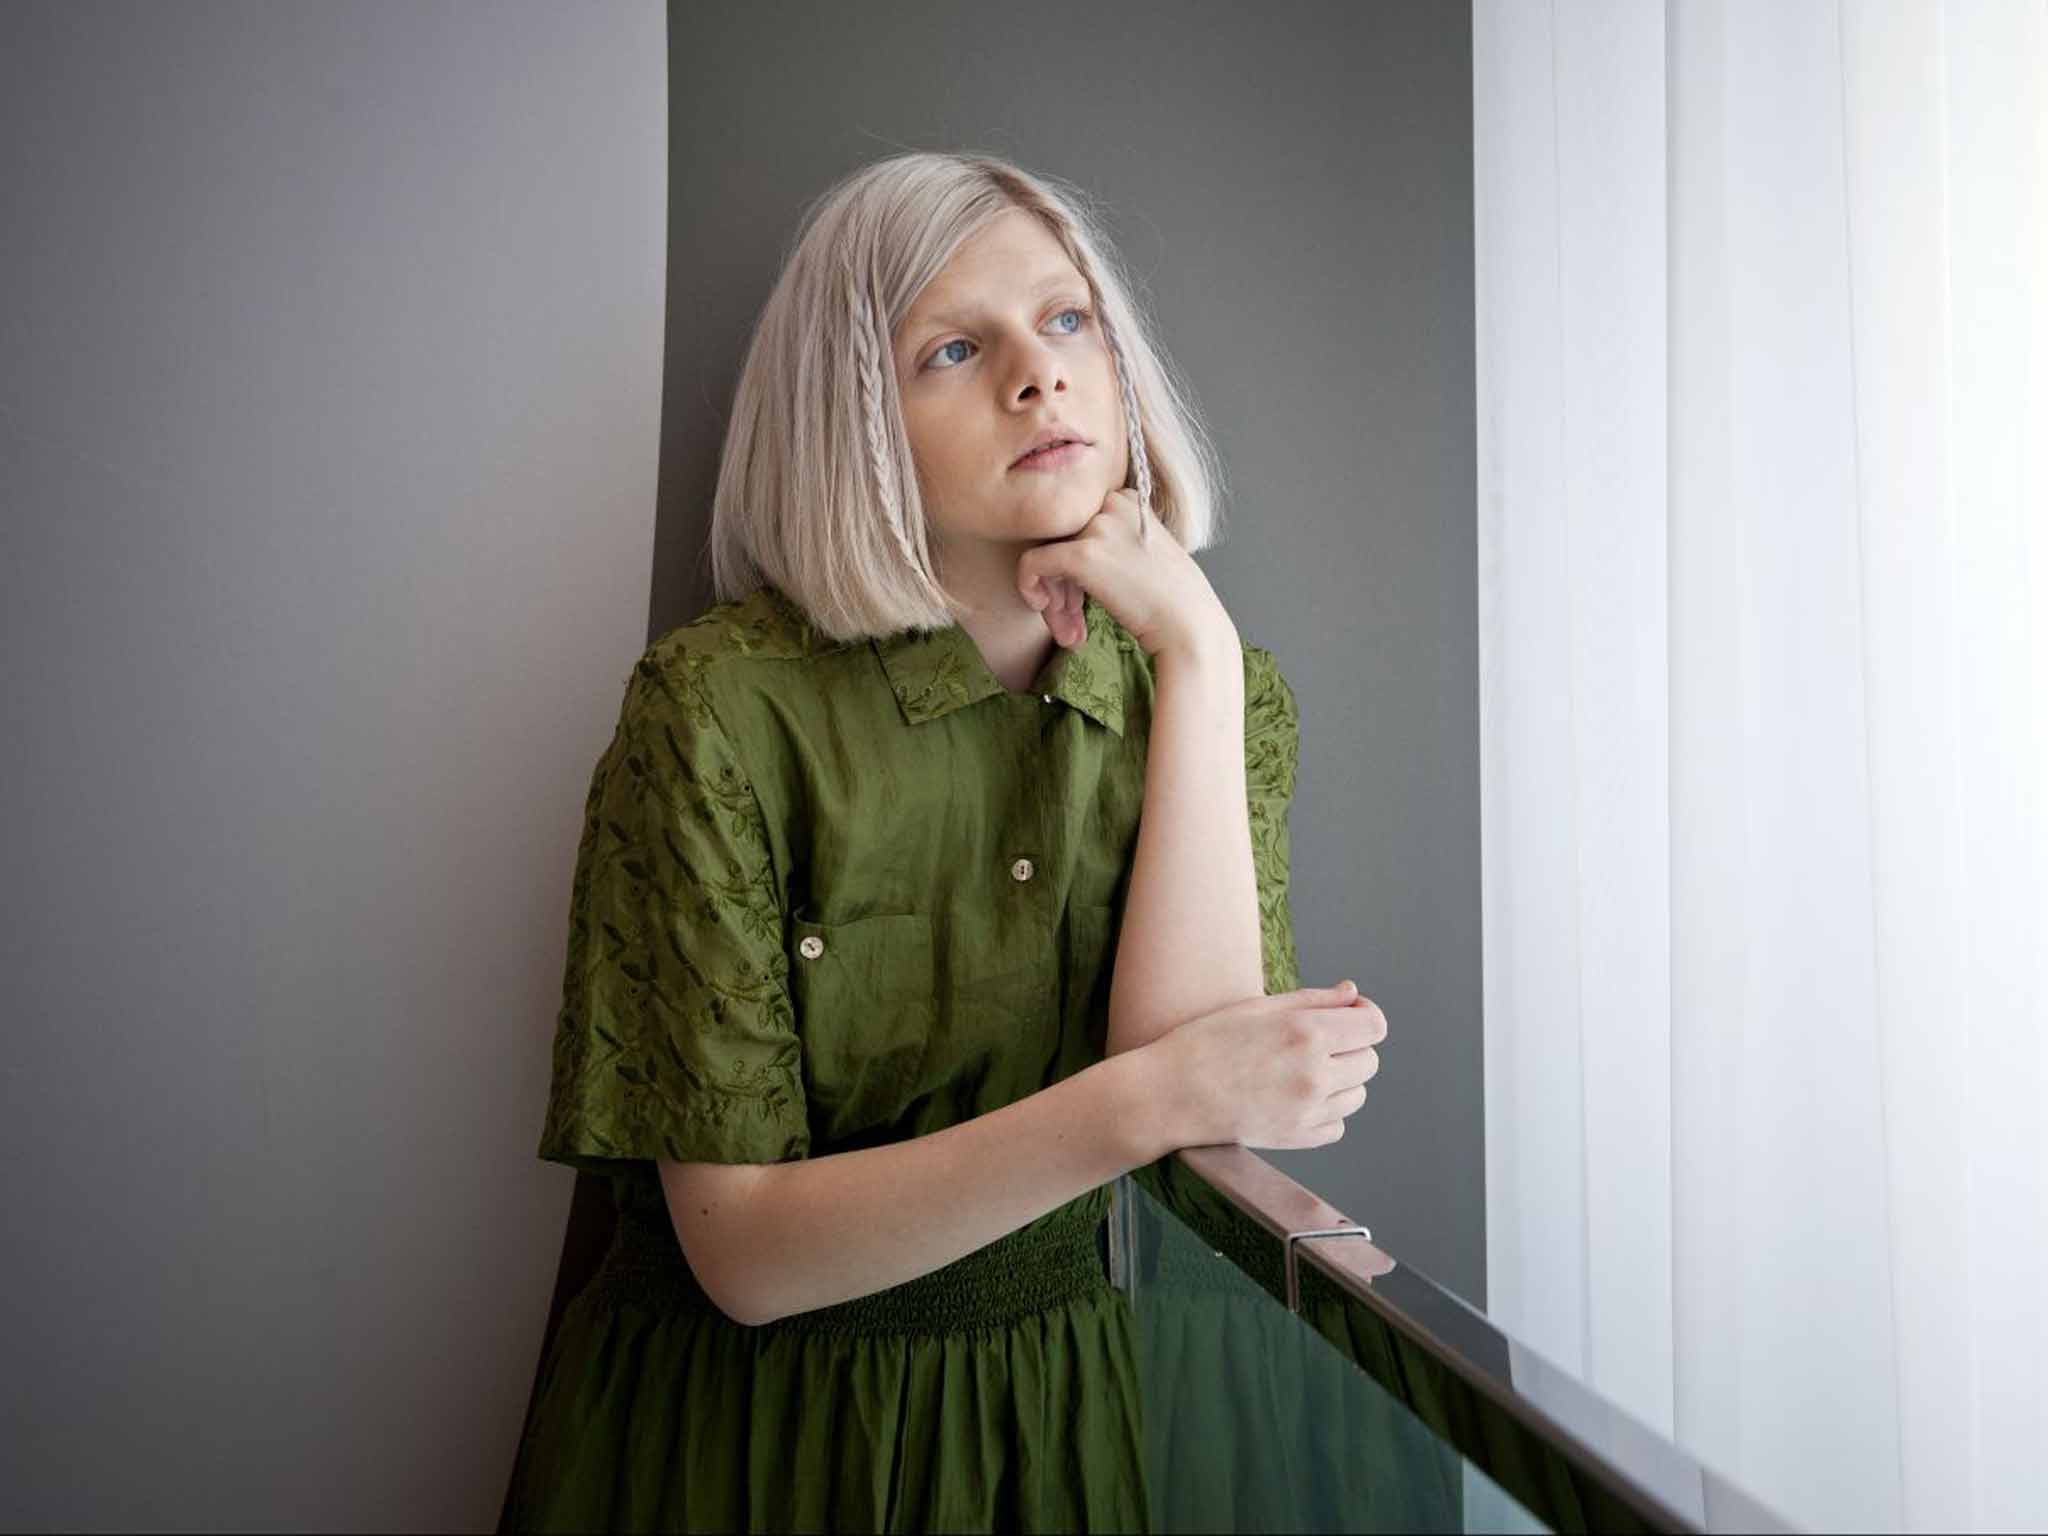 Aurora on her debut album, John Lewis Christmas advert, and remote